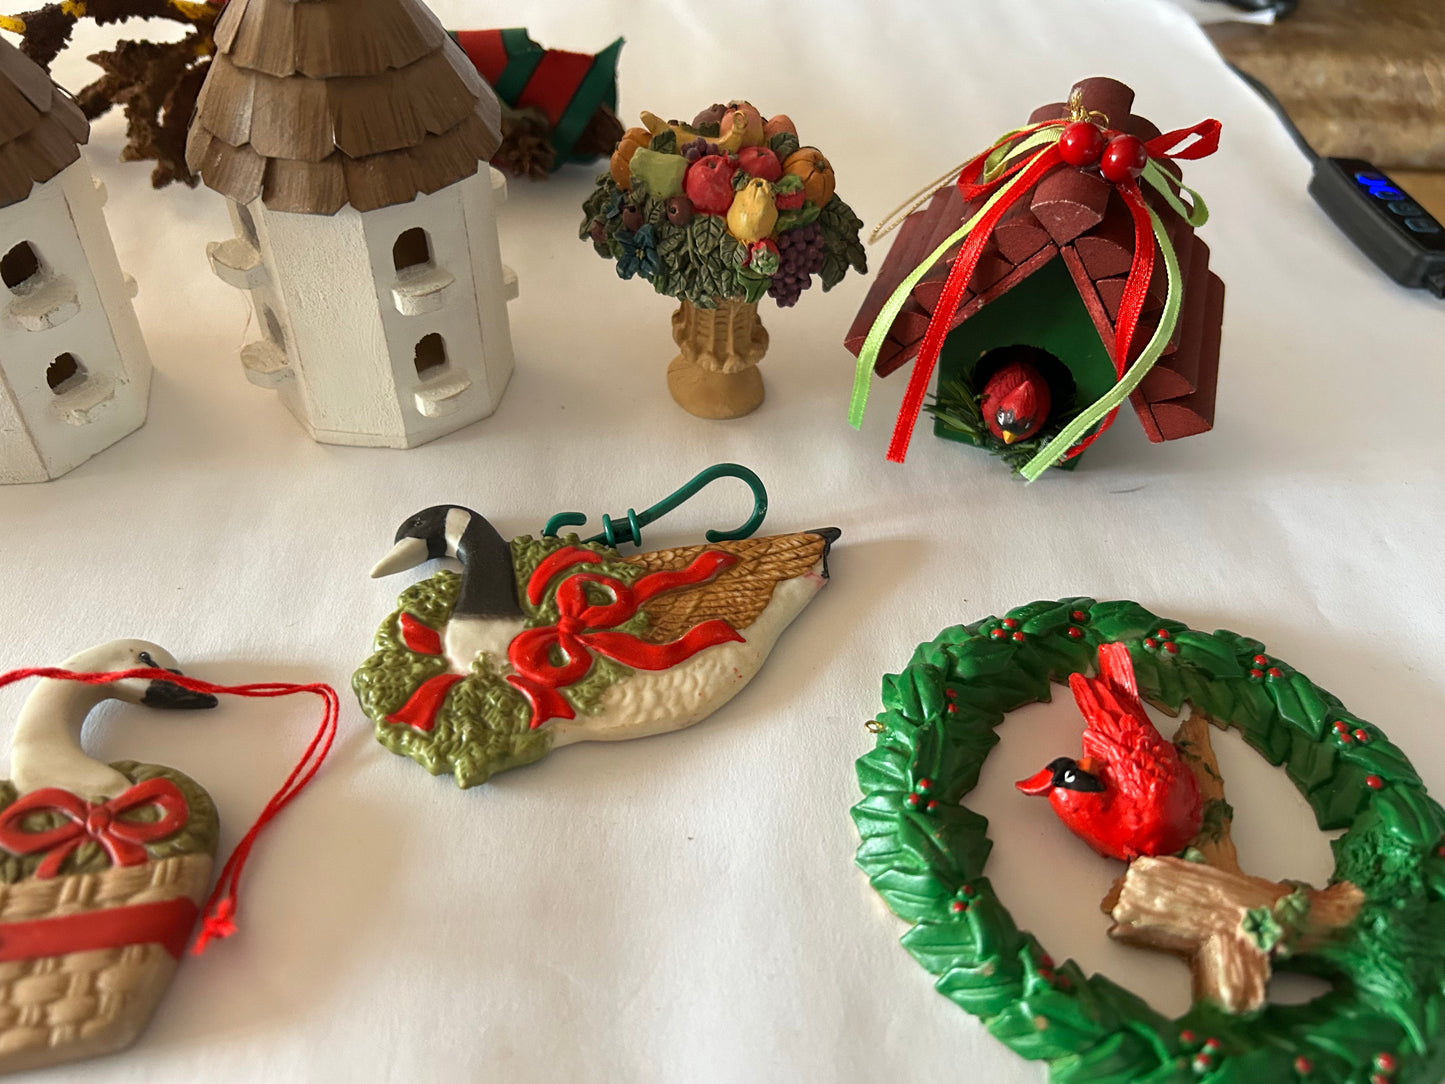 Vintage 1970s Assorted Christmas Ornaments - Set of 14 Excellent Condition